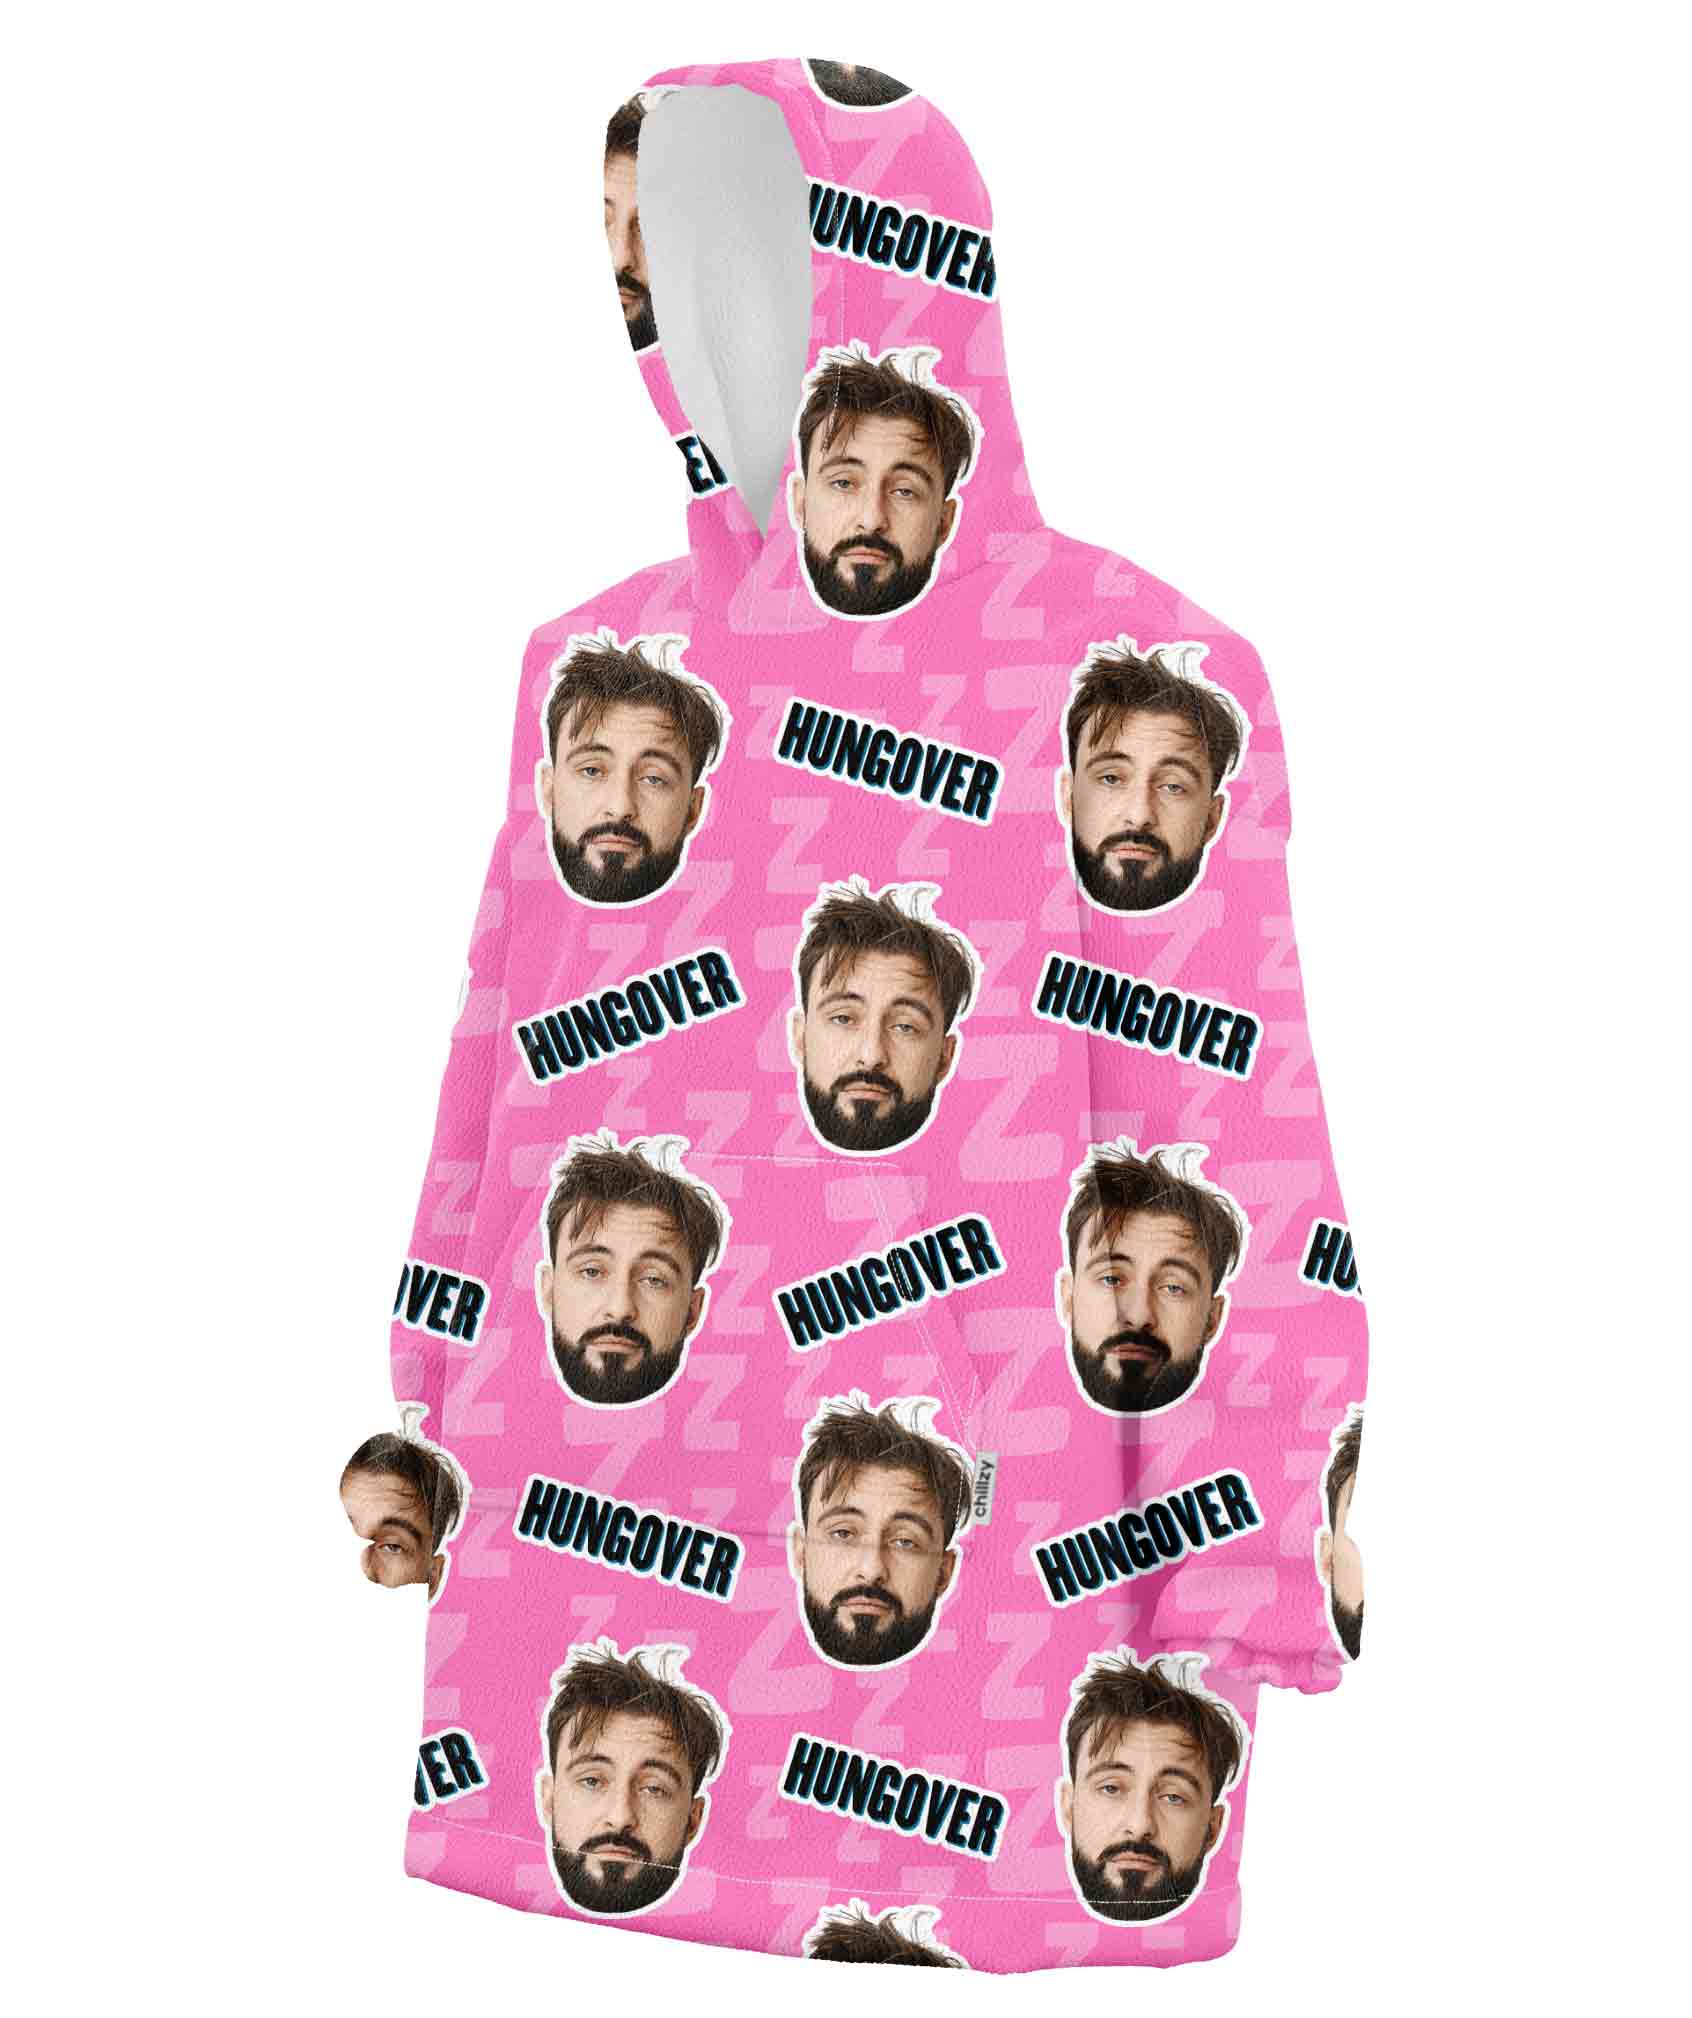 Hungover Chillzy Hoodie Blanket